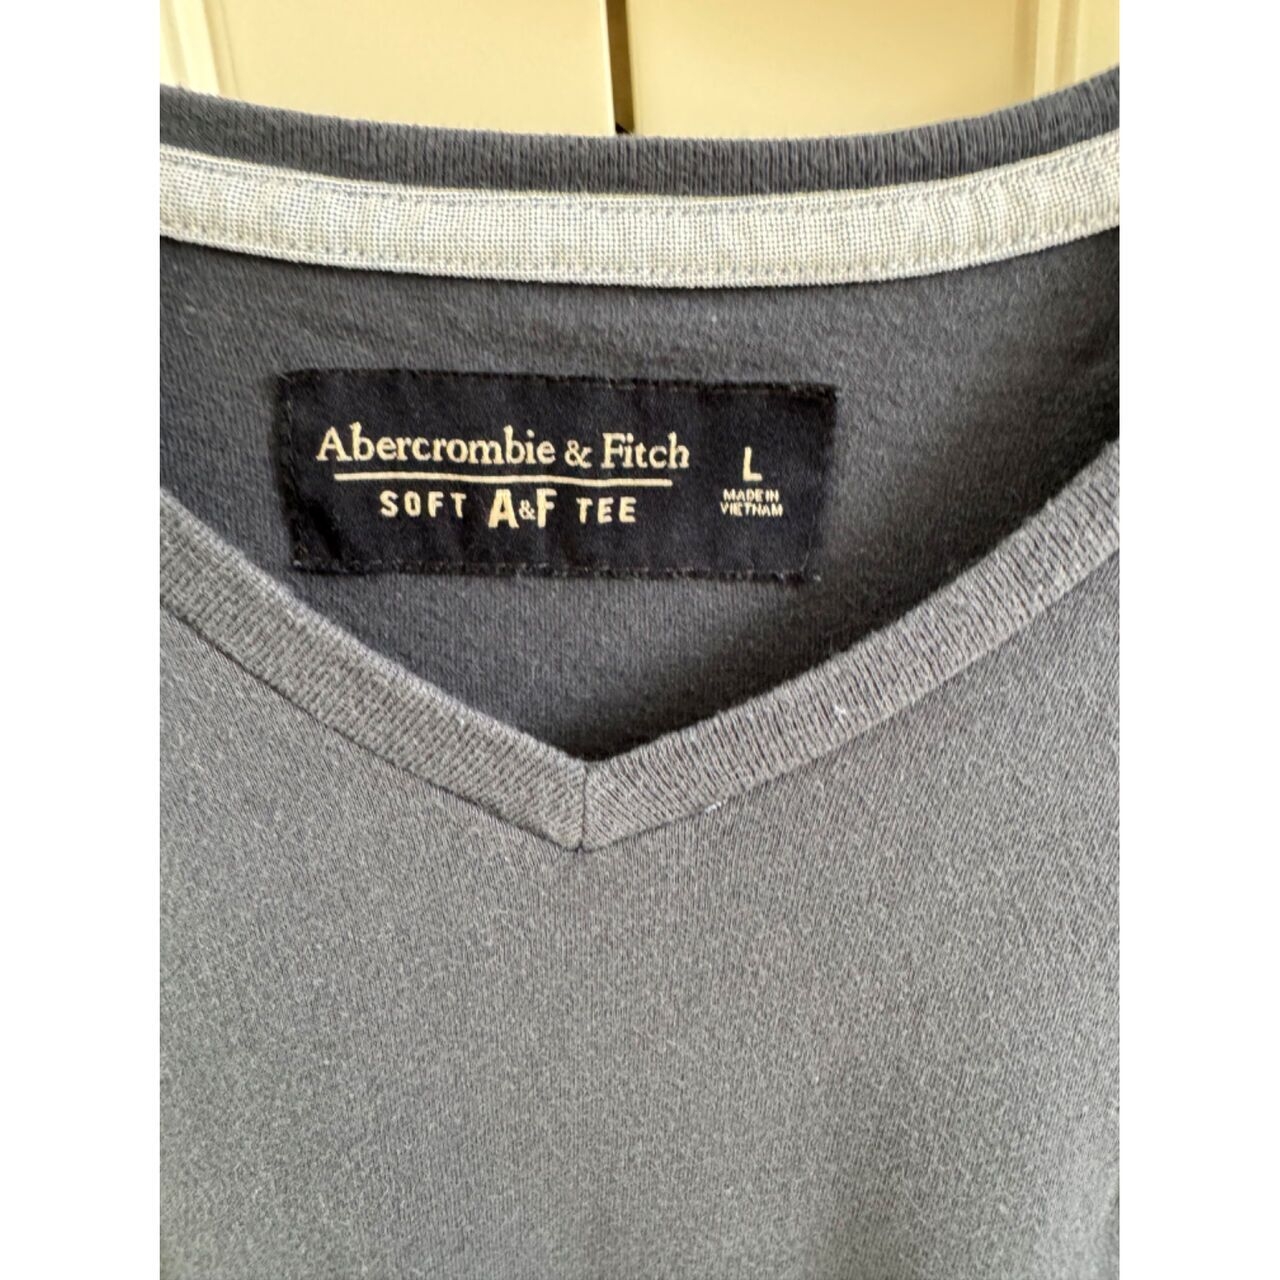 Abercrombie & Fitch Navy T-Shirt